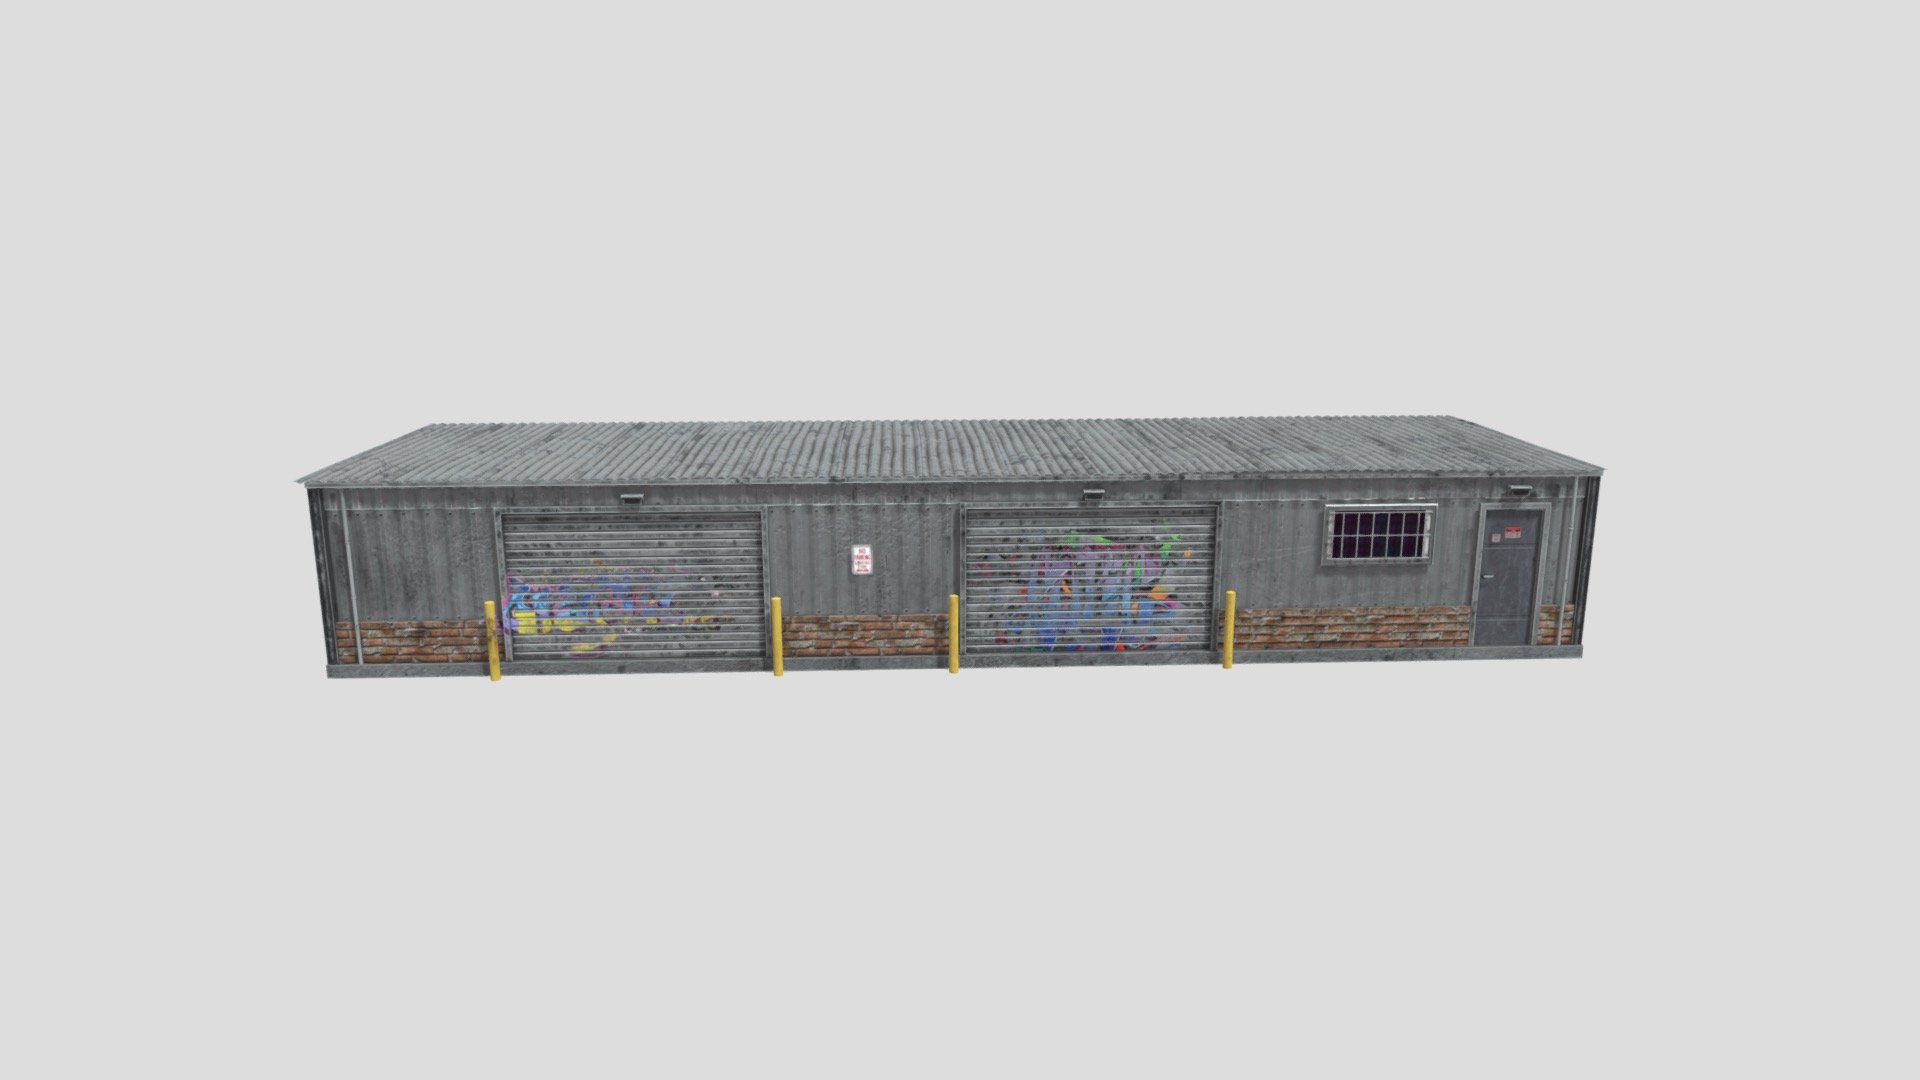 This Small Industrial Utility Garage is perfect for any warehouse, factory, airport, or commercial setting. The model is viewable from all angles and distances and comes with 3 texture variants for more useability.

This Includes:

The mesh
4K and 2K Texture set (Albedo, Metallic, Roughness, Normal, Height)
3 Variants ( Grey, Blue, and Red)
The Mesh is UV Unwrapped with vertex colors and can easily be retextured 3d model